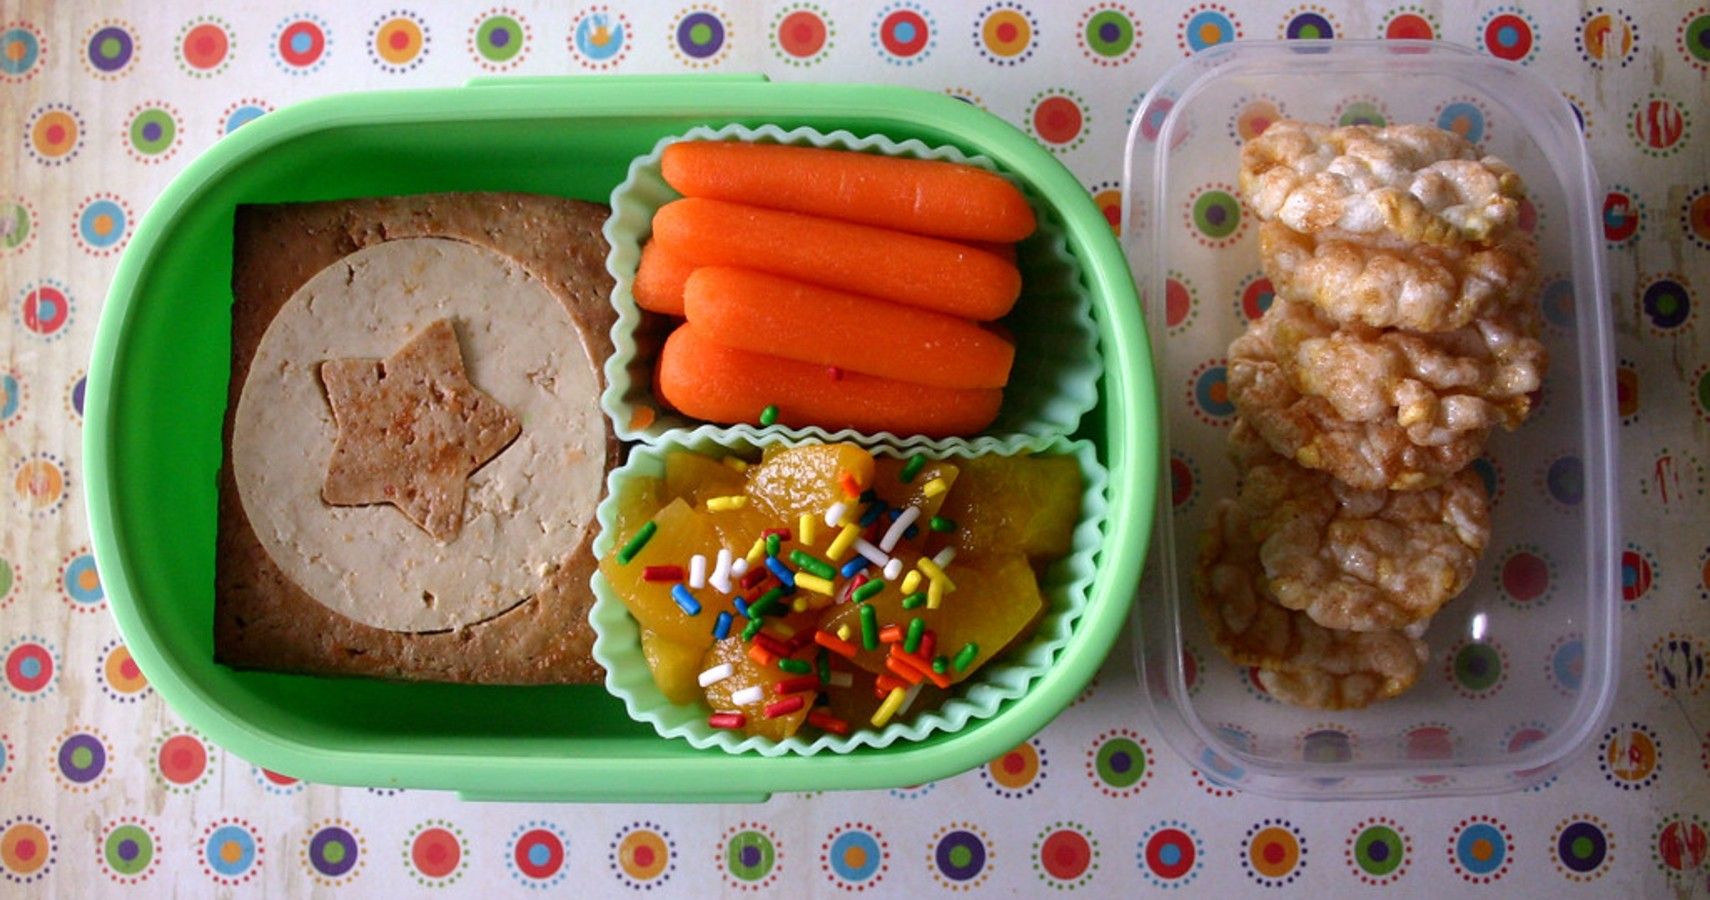 https://static0.babygagaimages.com/wordpress/wp-content/uploads/2021/08/Simple-Lunches-For-Toddlers-Entering-Daycare.jpg